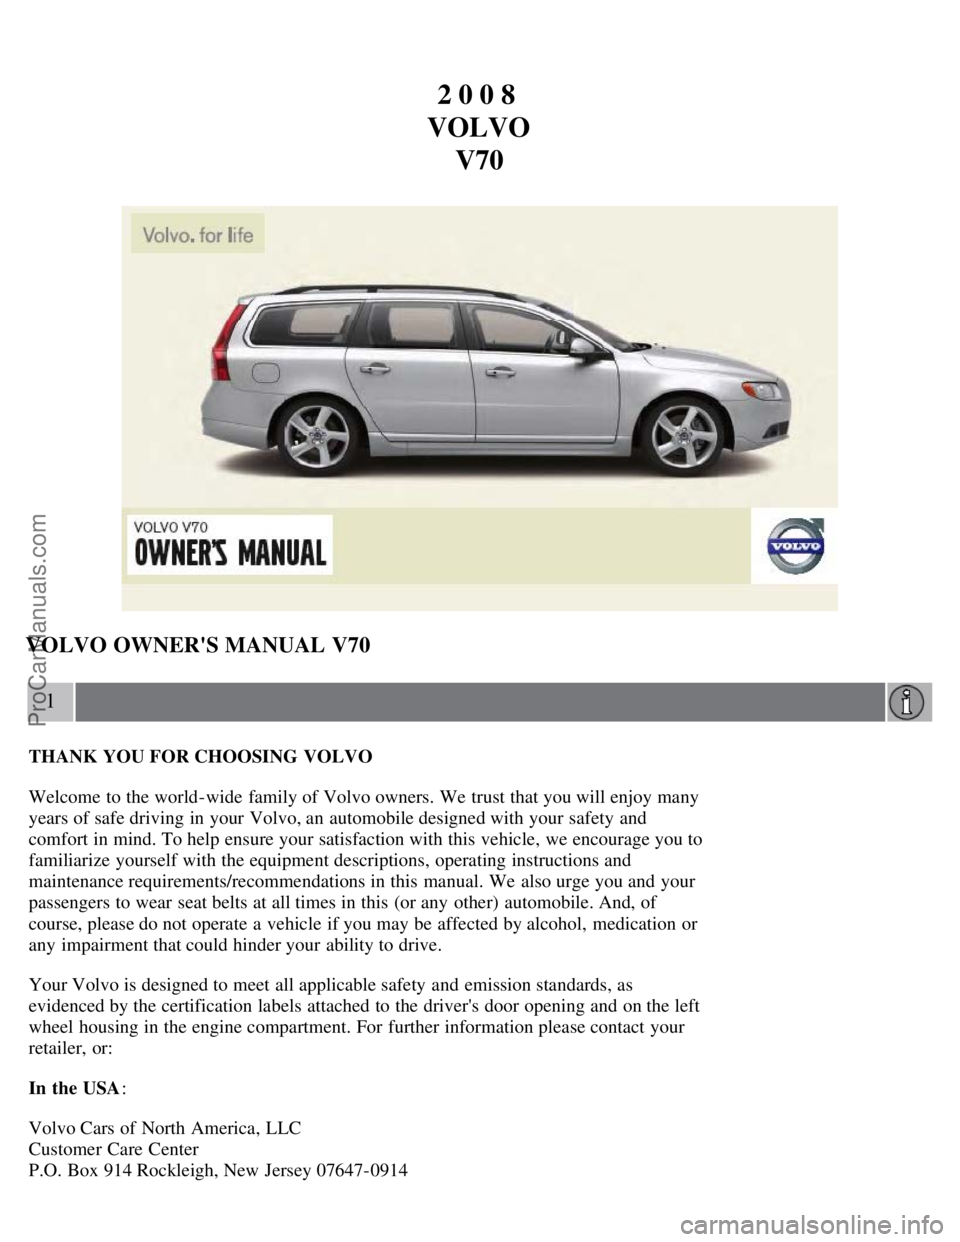 VOLVO V70 2008  Owners Manual 2 0 0 8 
VOLVO V70
VOLVO OWNERS MANUAL V70
1
THANK YOU FOR CHOOSING  VOLVO
Welcome to the world-wide  family of Volvo owners. We trust that you will enjoy many
years of safe driving in your Volvo, an